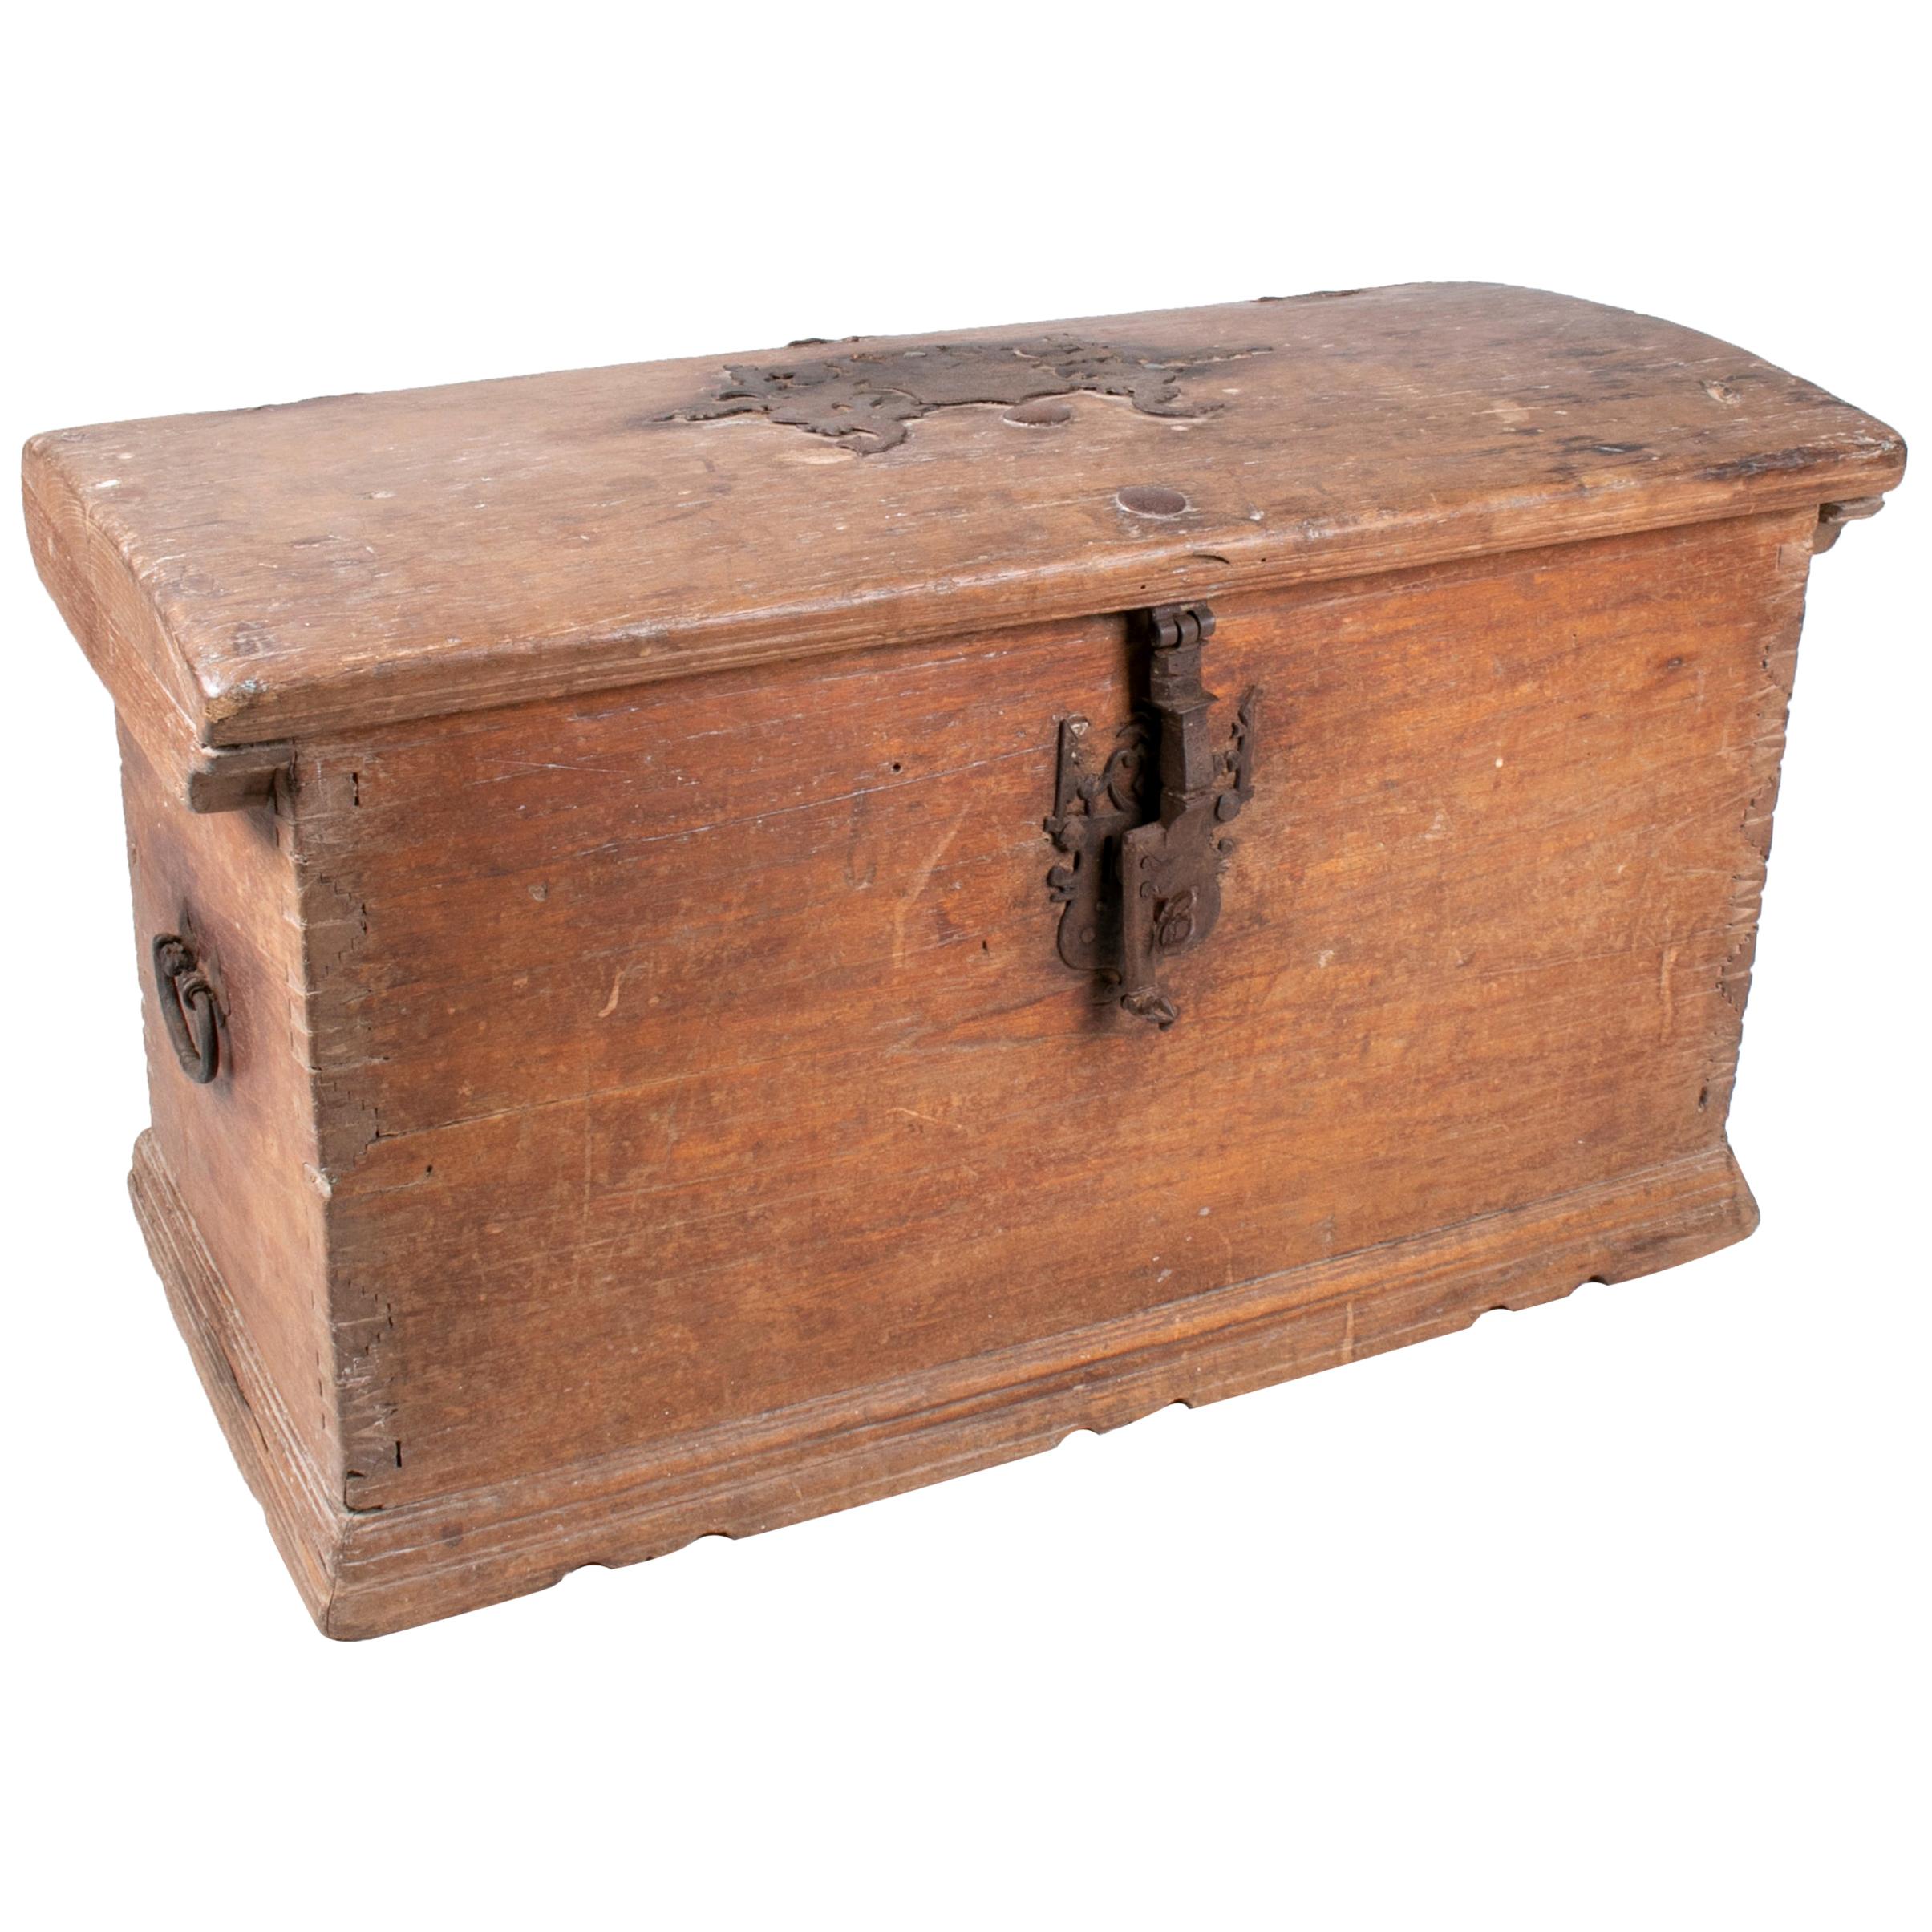 18th Century Spanish Pine Wood Rustic Trunk with Wrought Iron Fittings